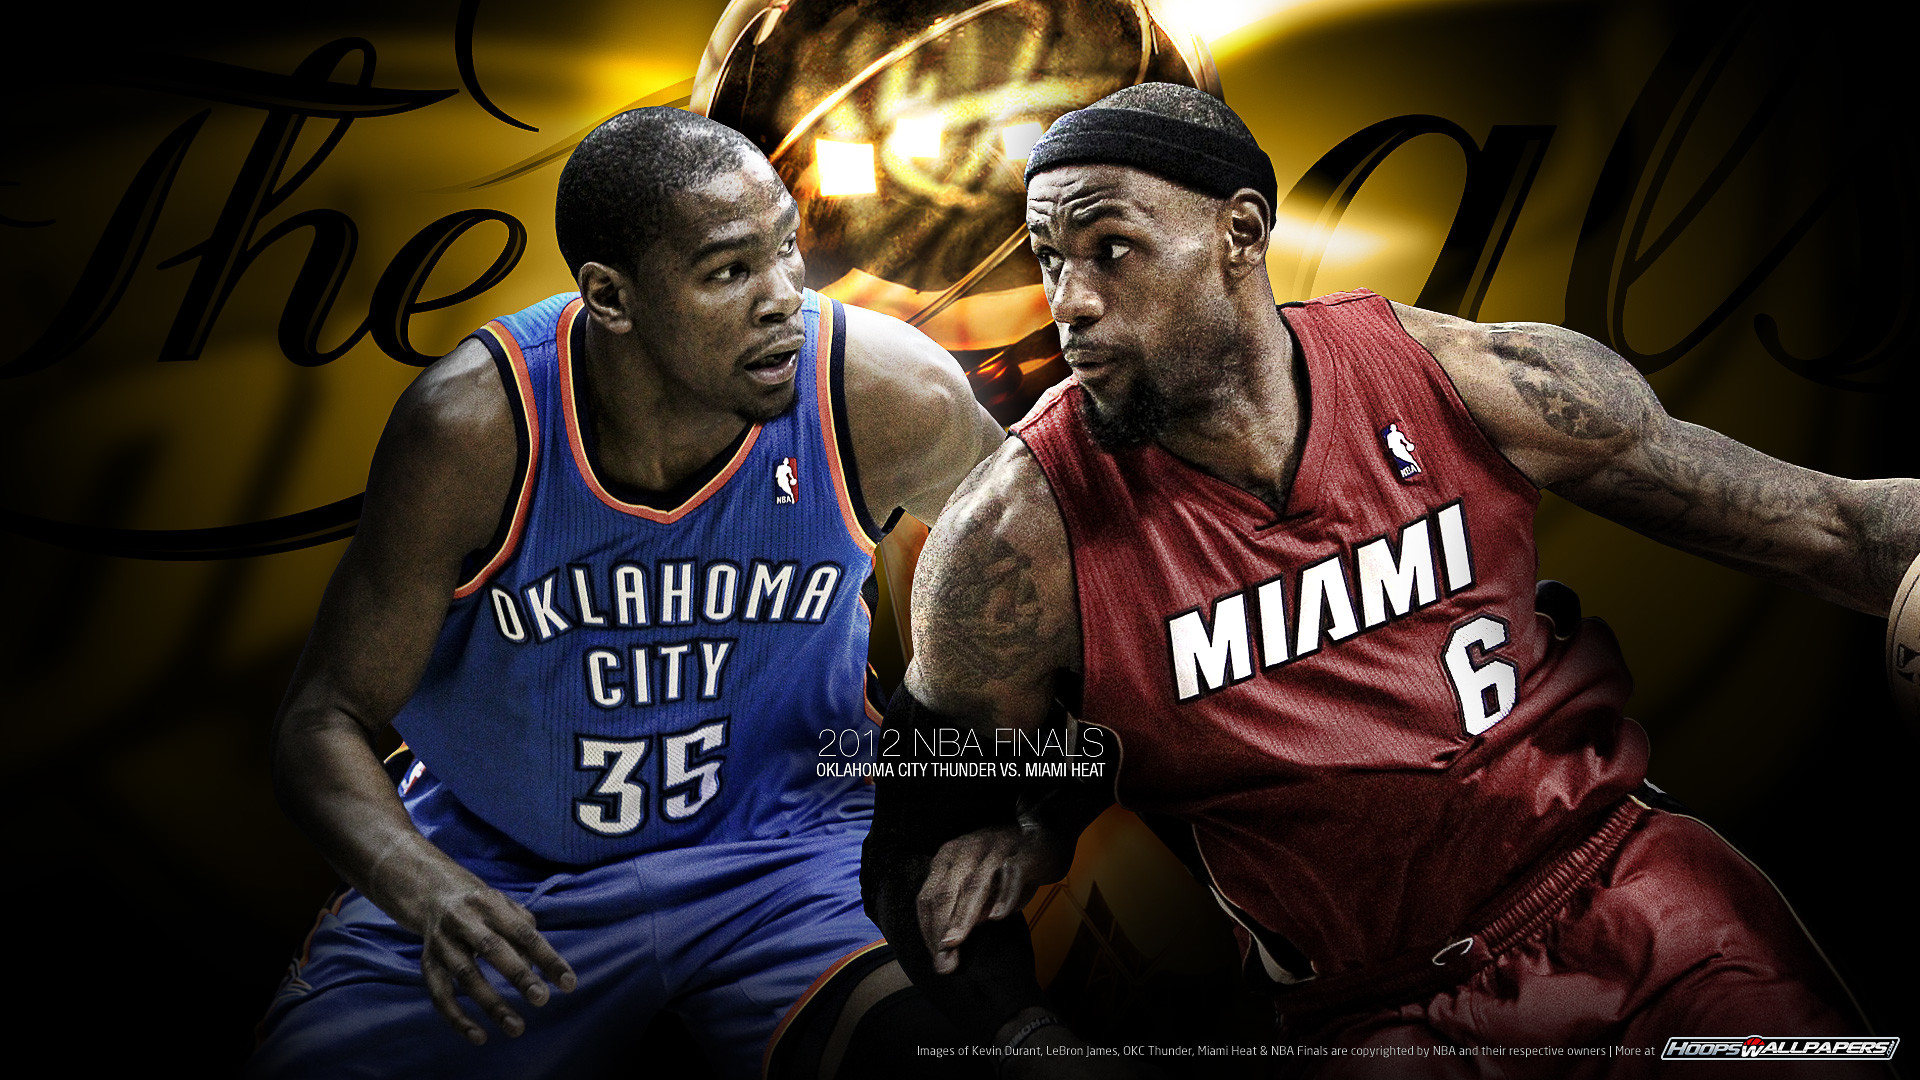 1920x1080 NBA Finals Picture - LeBron James and Kevin Durant, Heat and Thunder, Who is